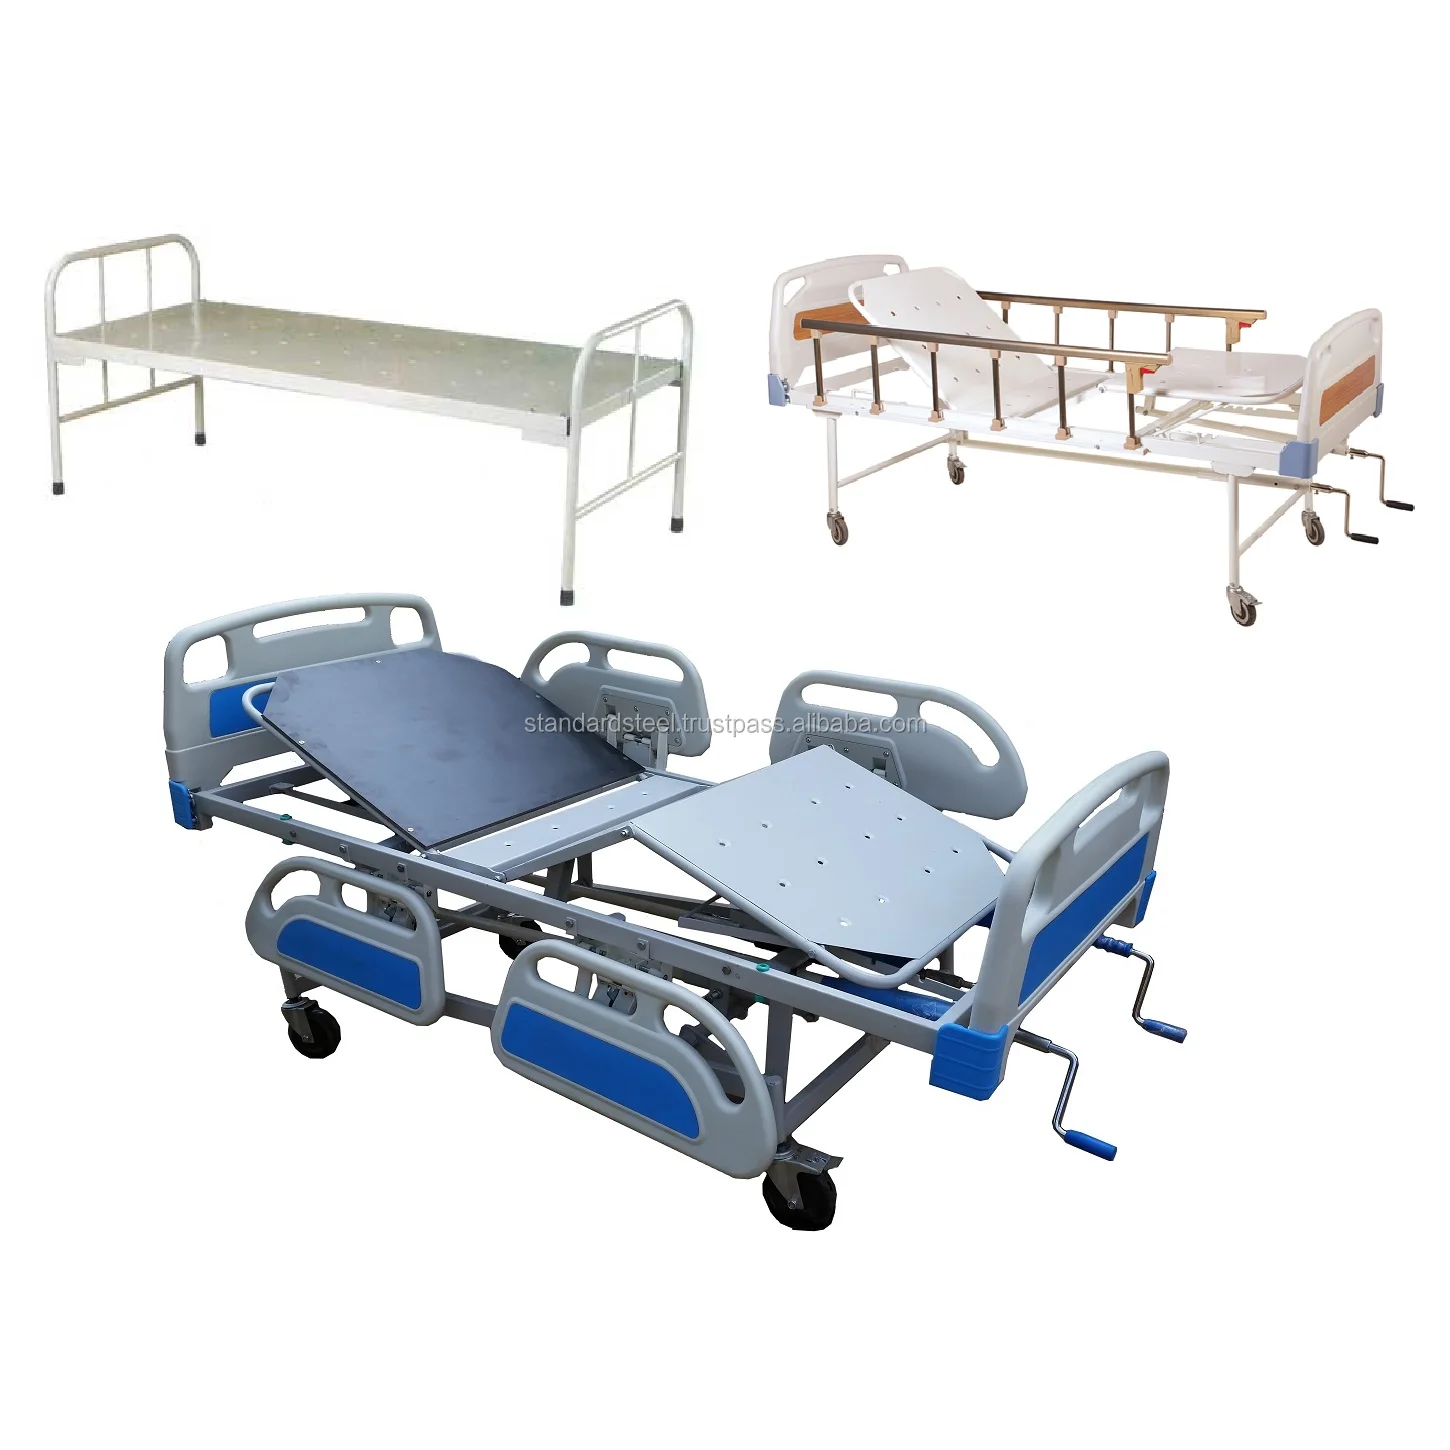 Hospital Bed Storage - Donnegan Systems Inc.